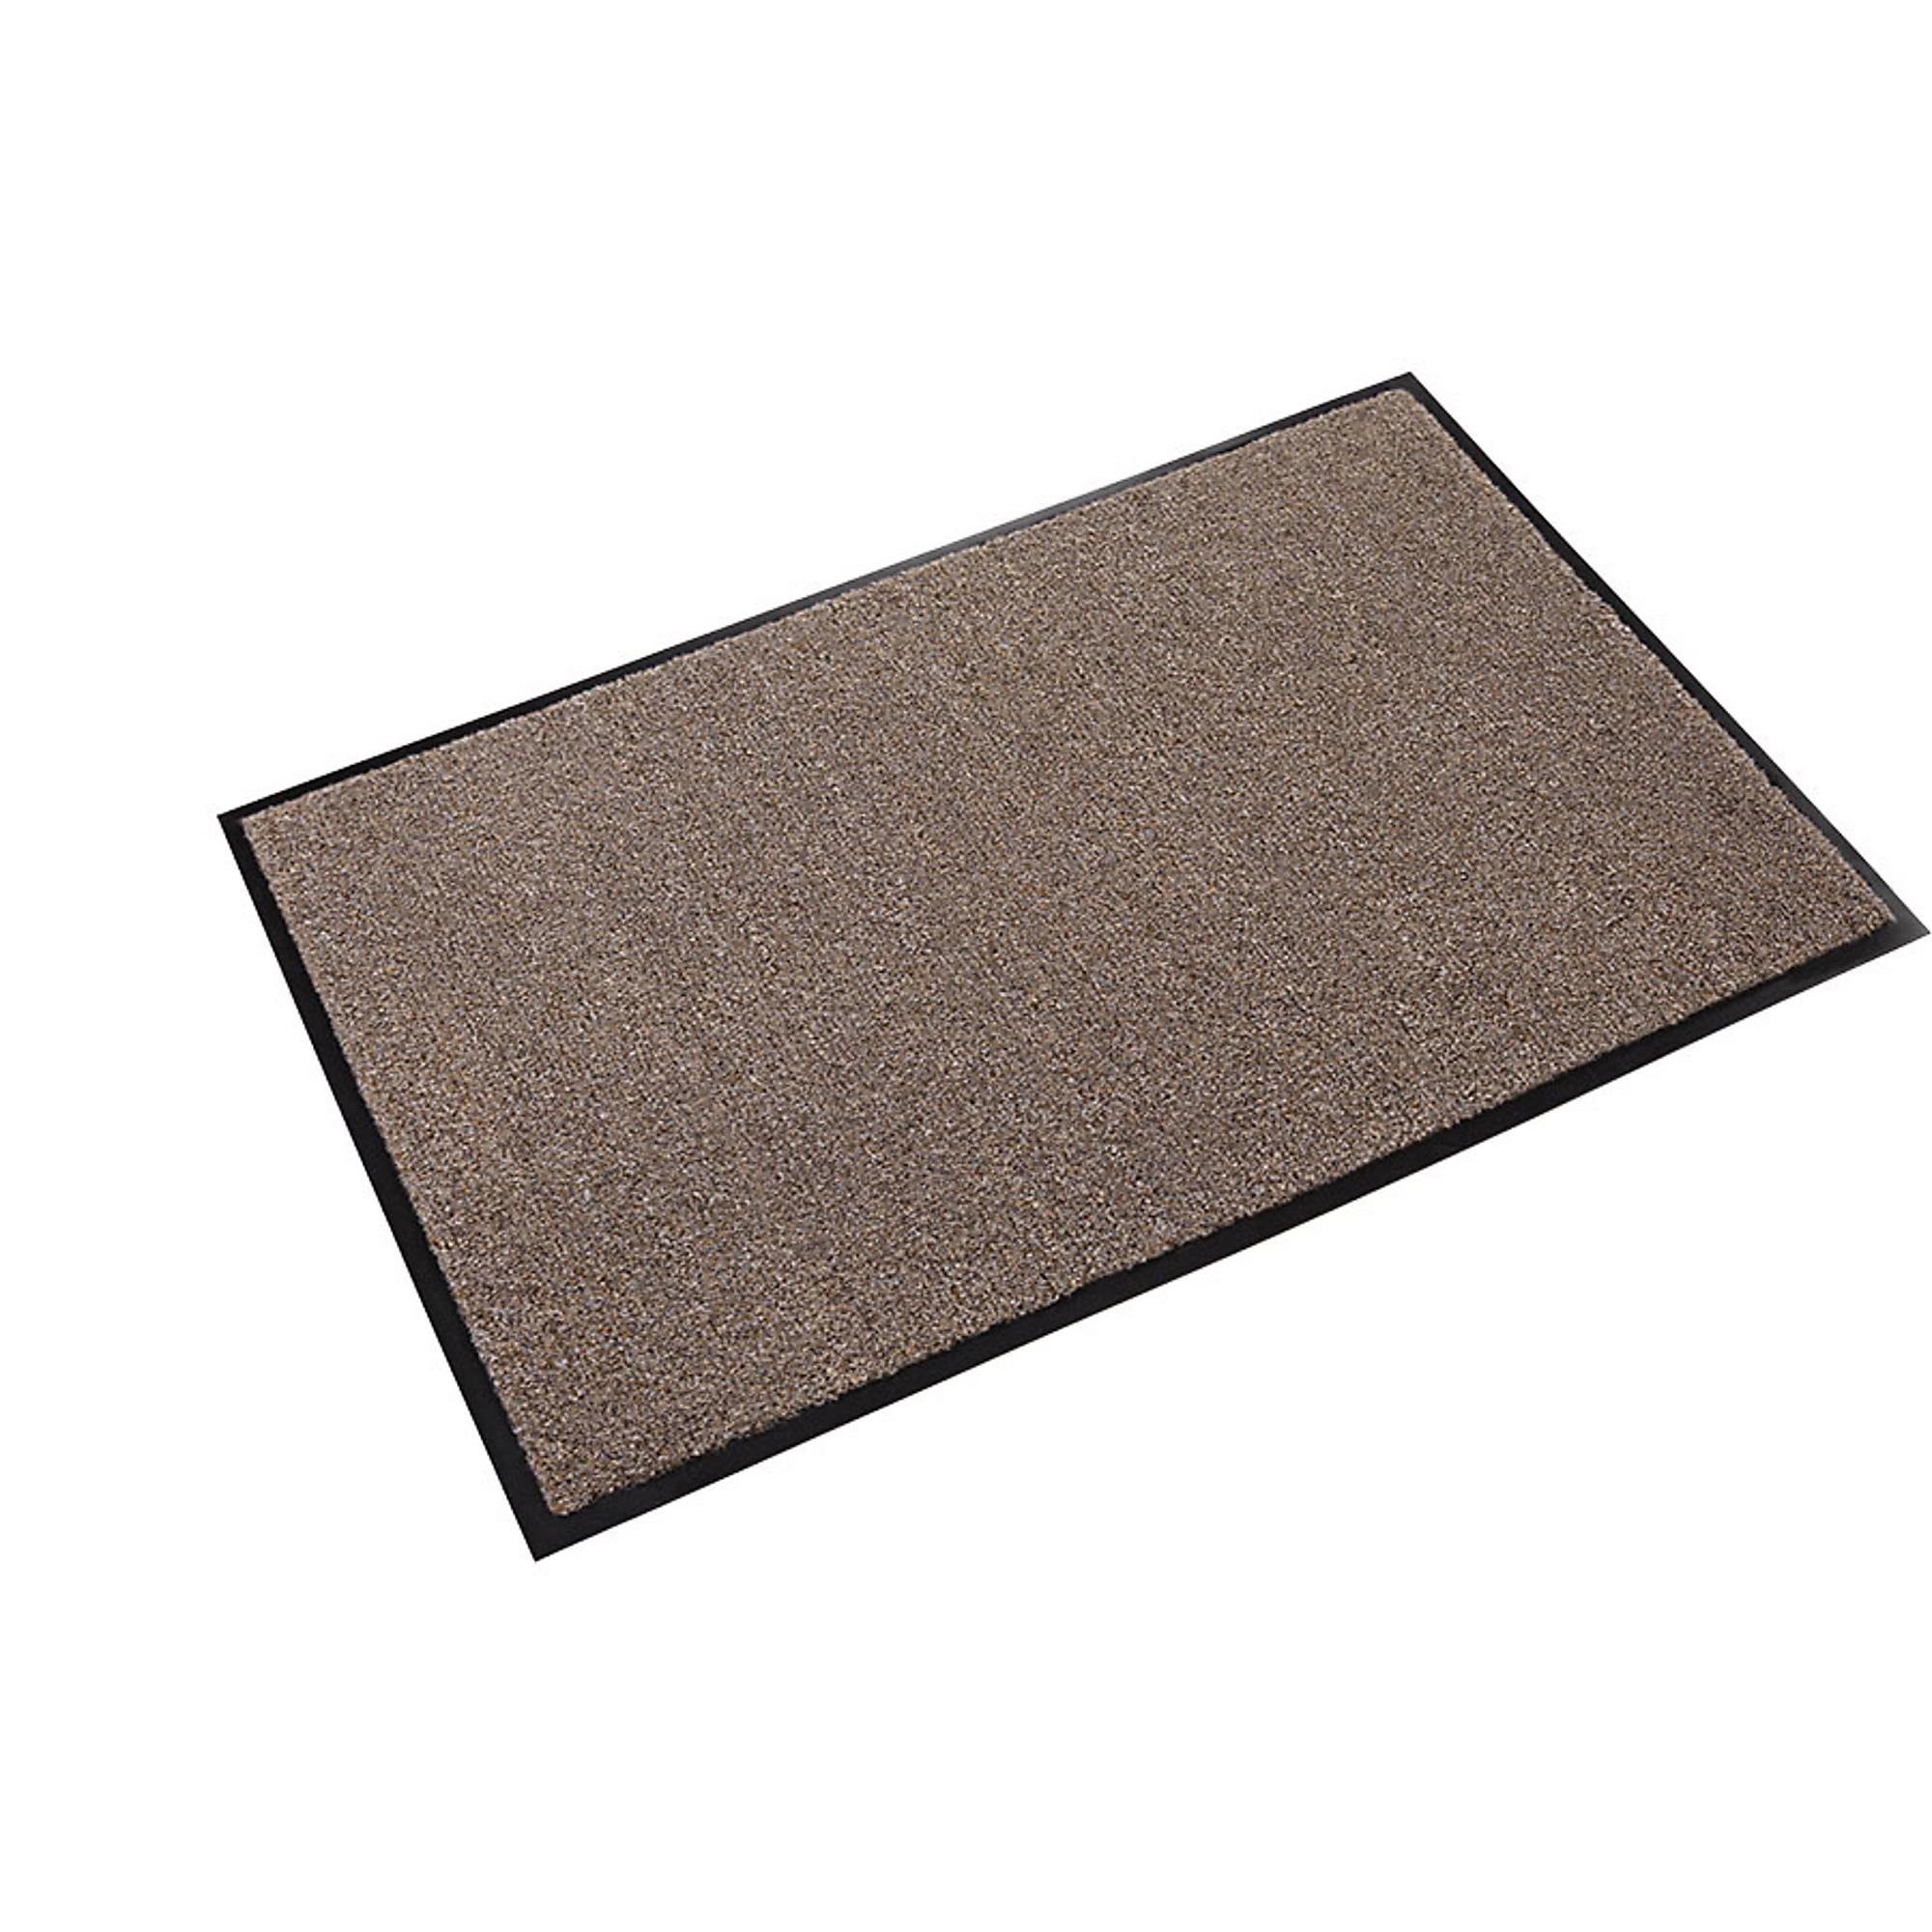 Crown Matting Technologies, Rely-On Olefin 4ft.x6ft. Pebble Brown, Width 48 in, Length 72 in, Thickness 3/8 in, Model GS 0046PB